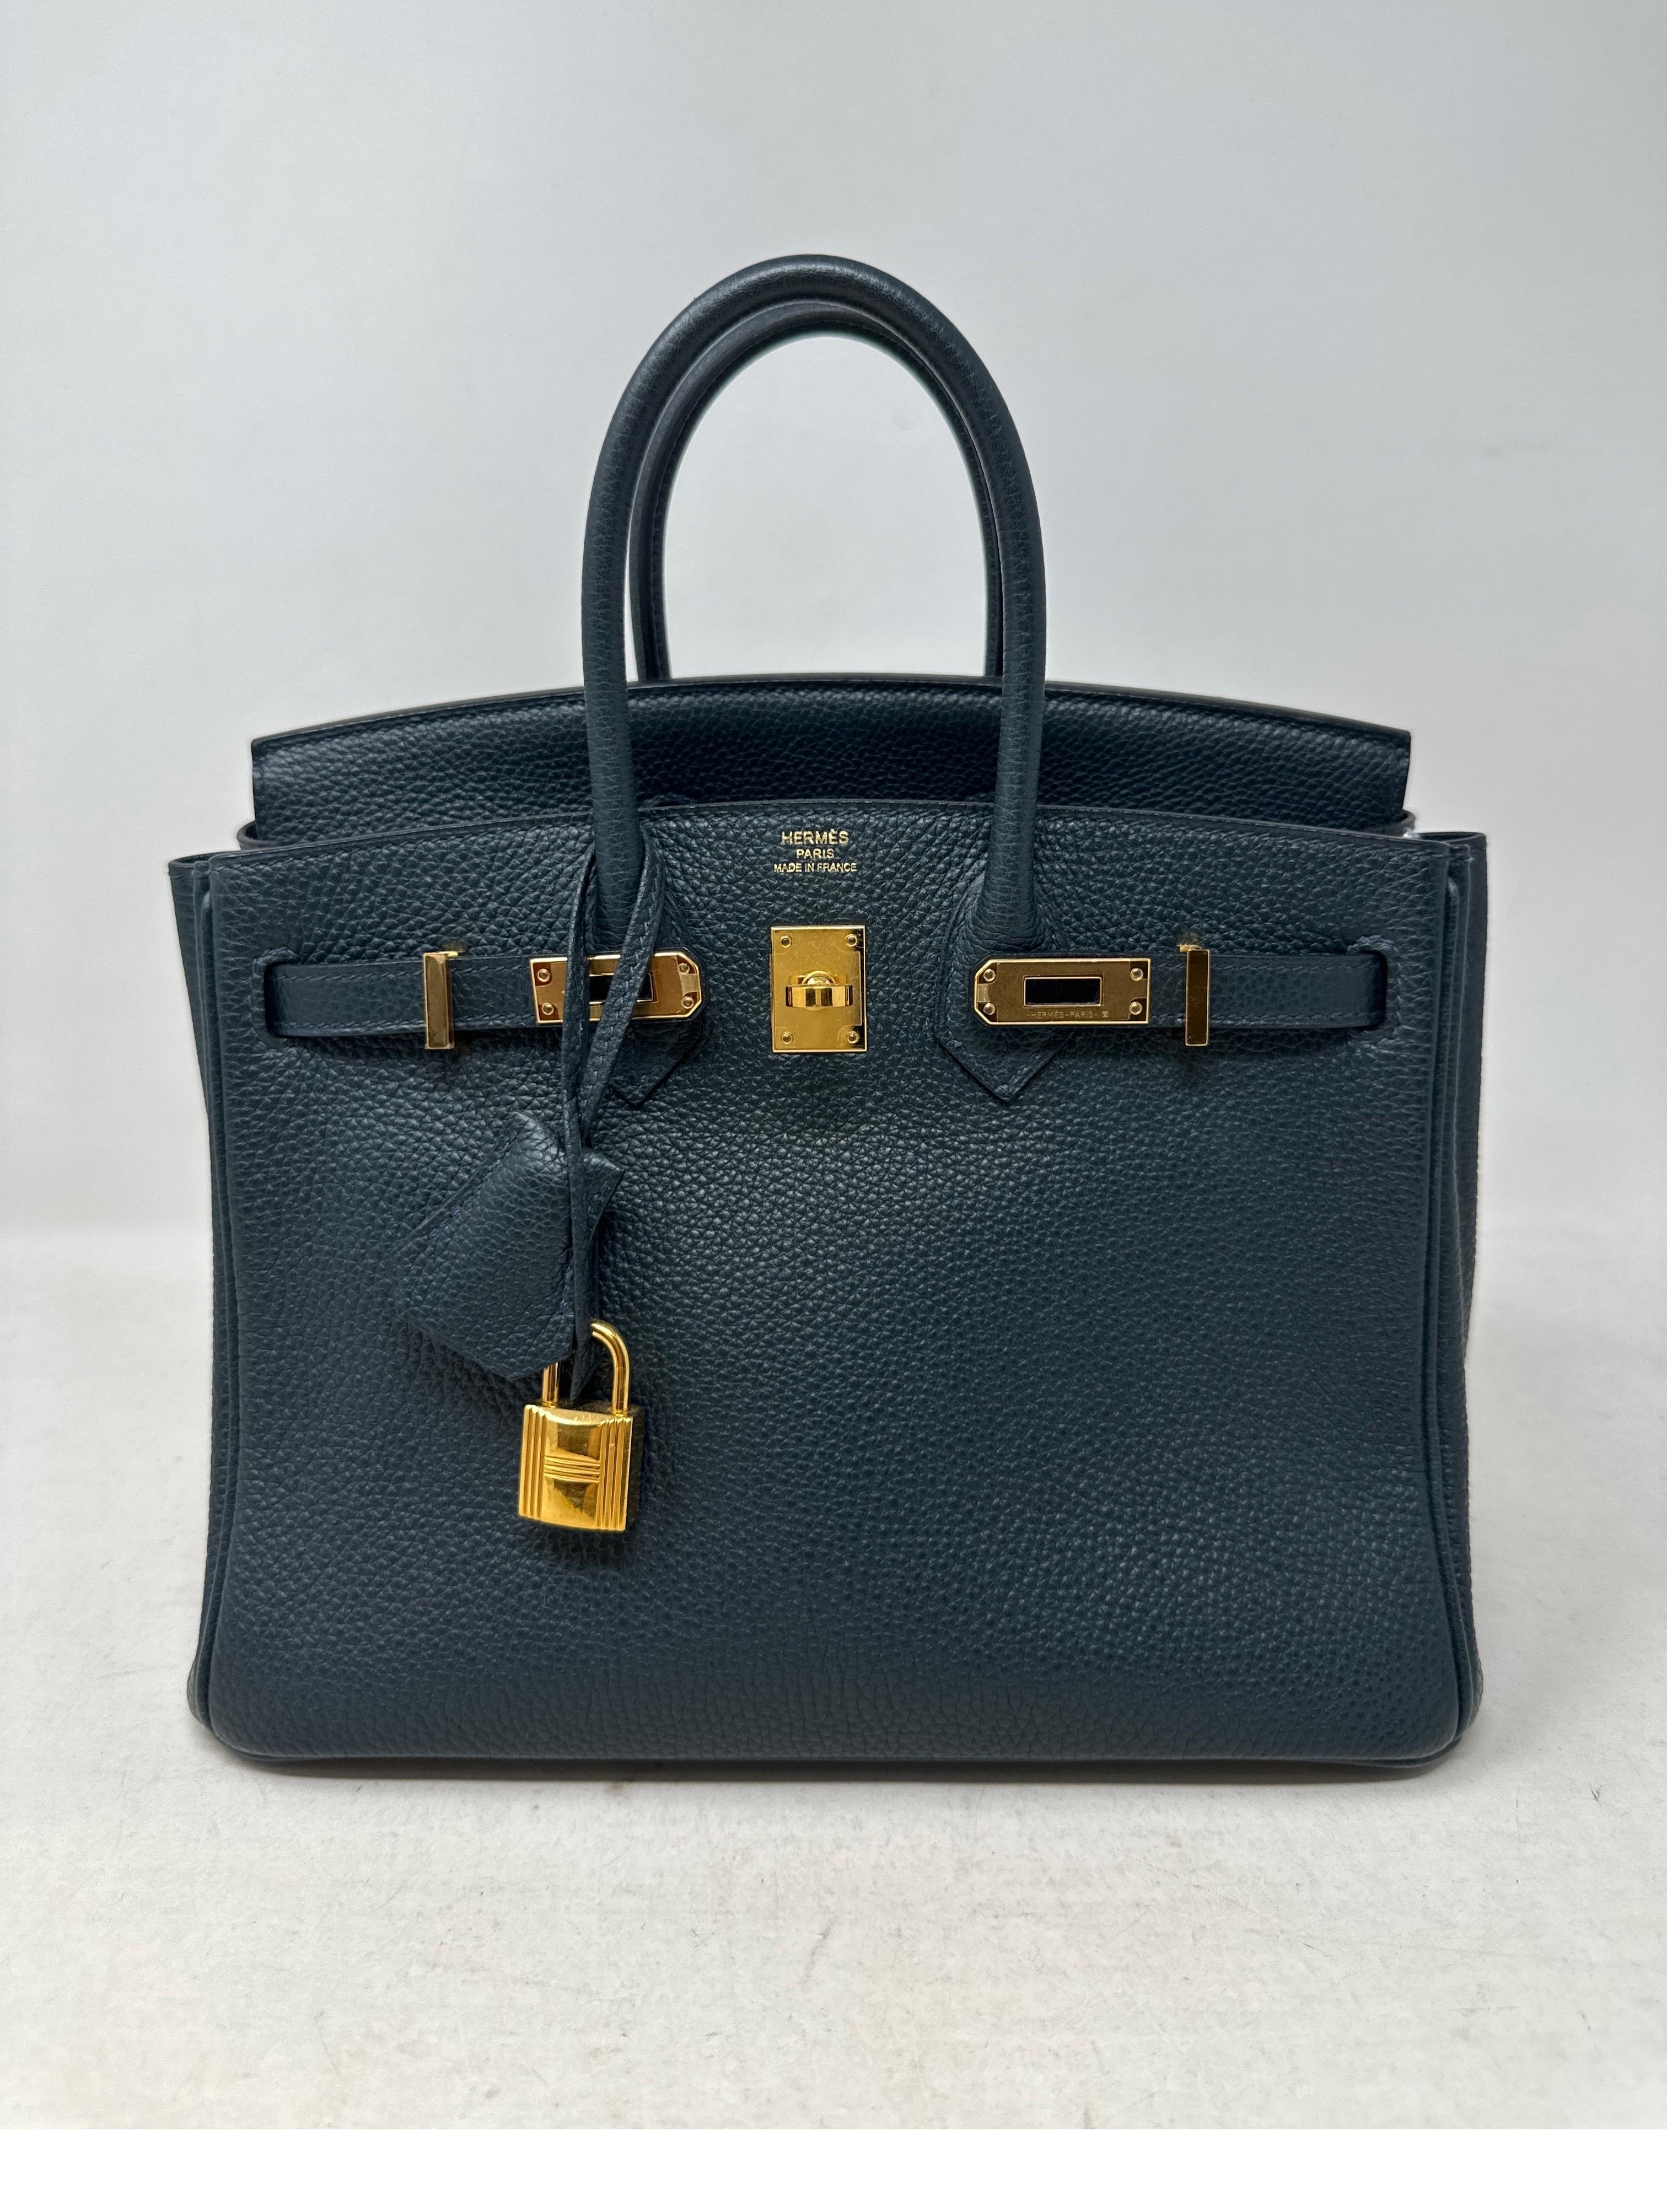 Hermes Navy 25 Birkin Bag. Rare navy color with gold hardware. Good condition. Interior clean. Togo leather. Collector's piece. Includes clochette, lock,  keys, and dust bag. Guaranteed authentic. Don't miss out on this one. 